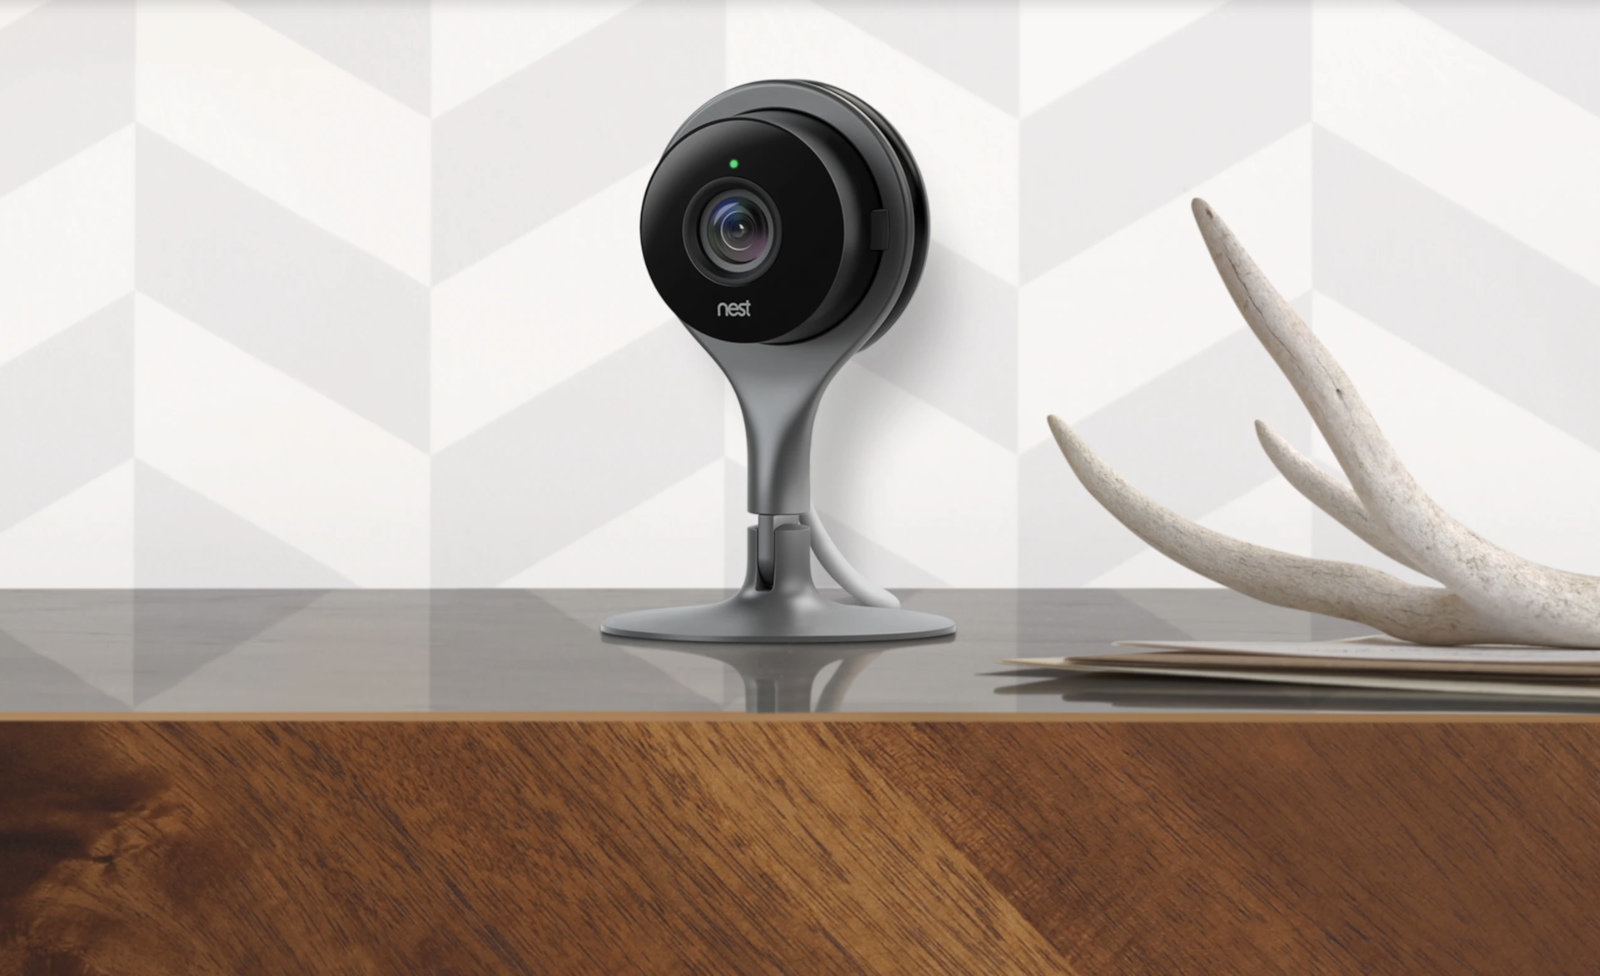 Google affirms plans for new Nest Cam lineup this year